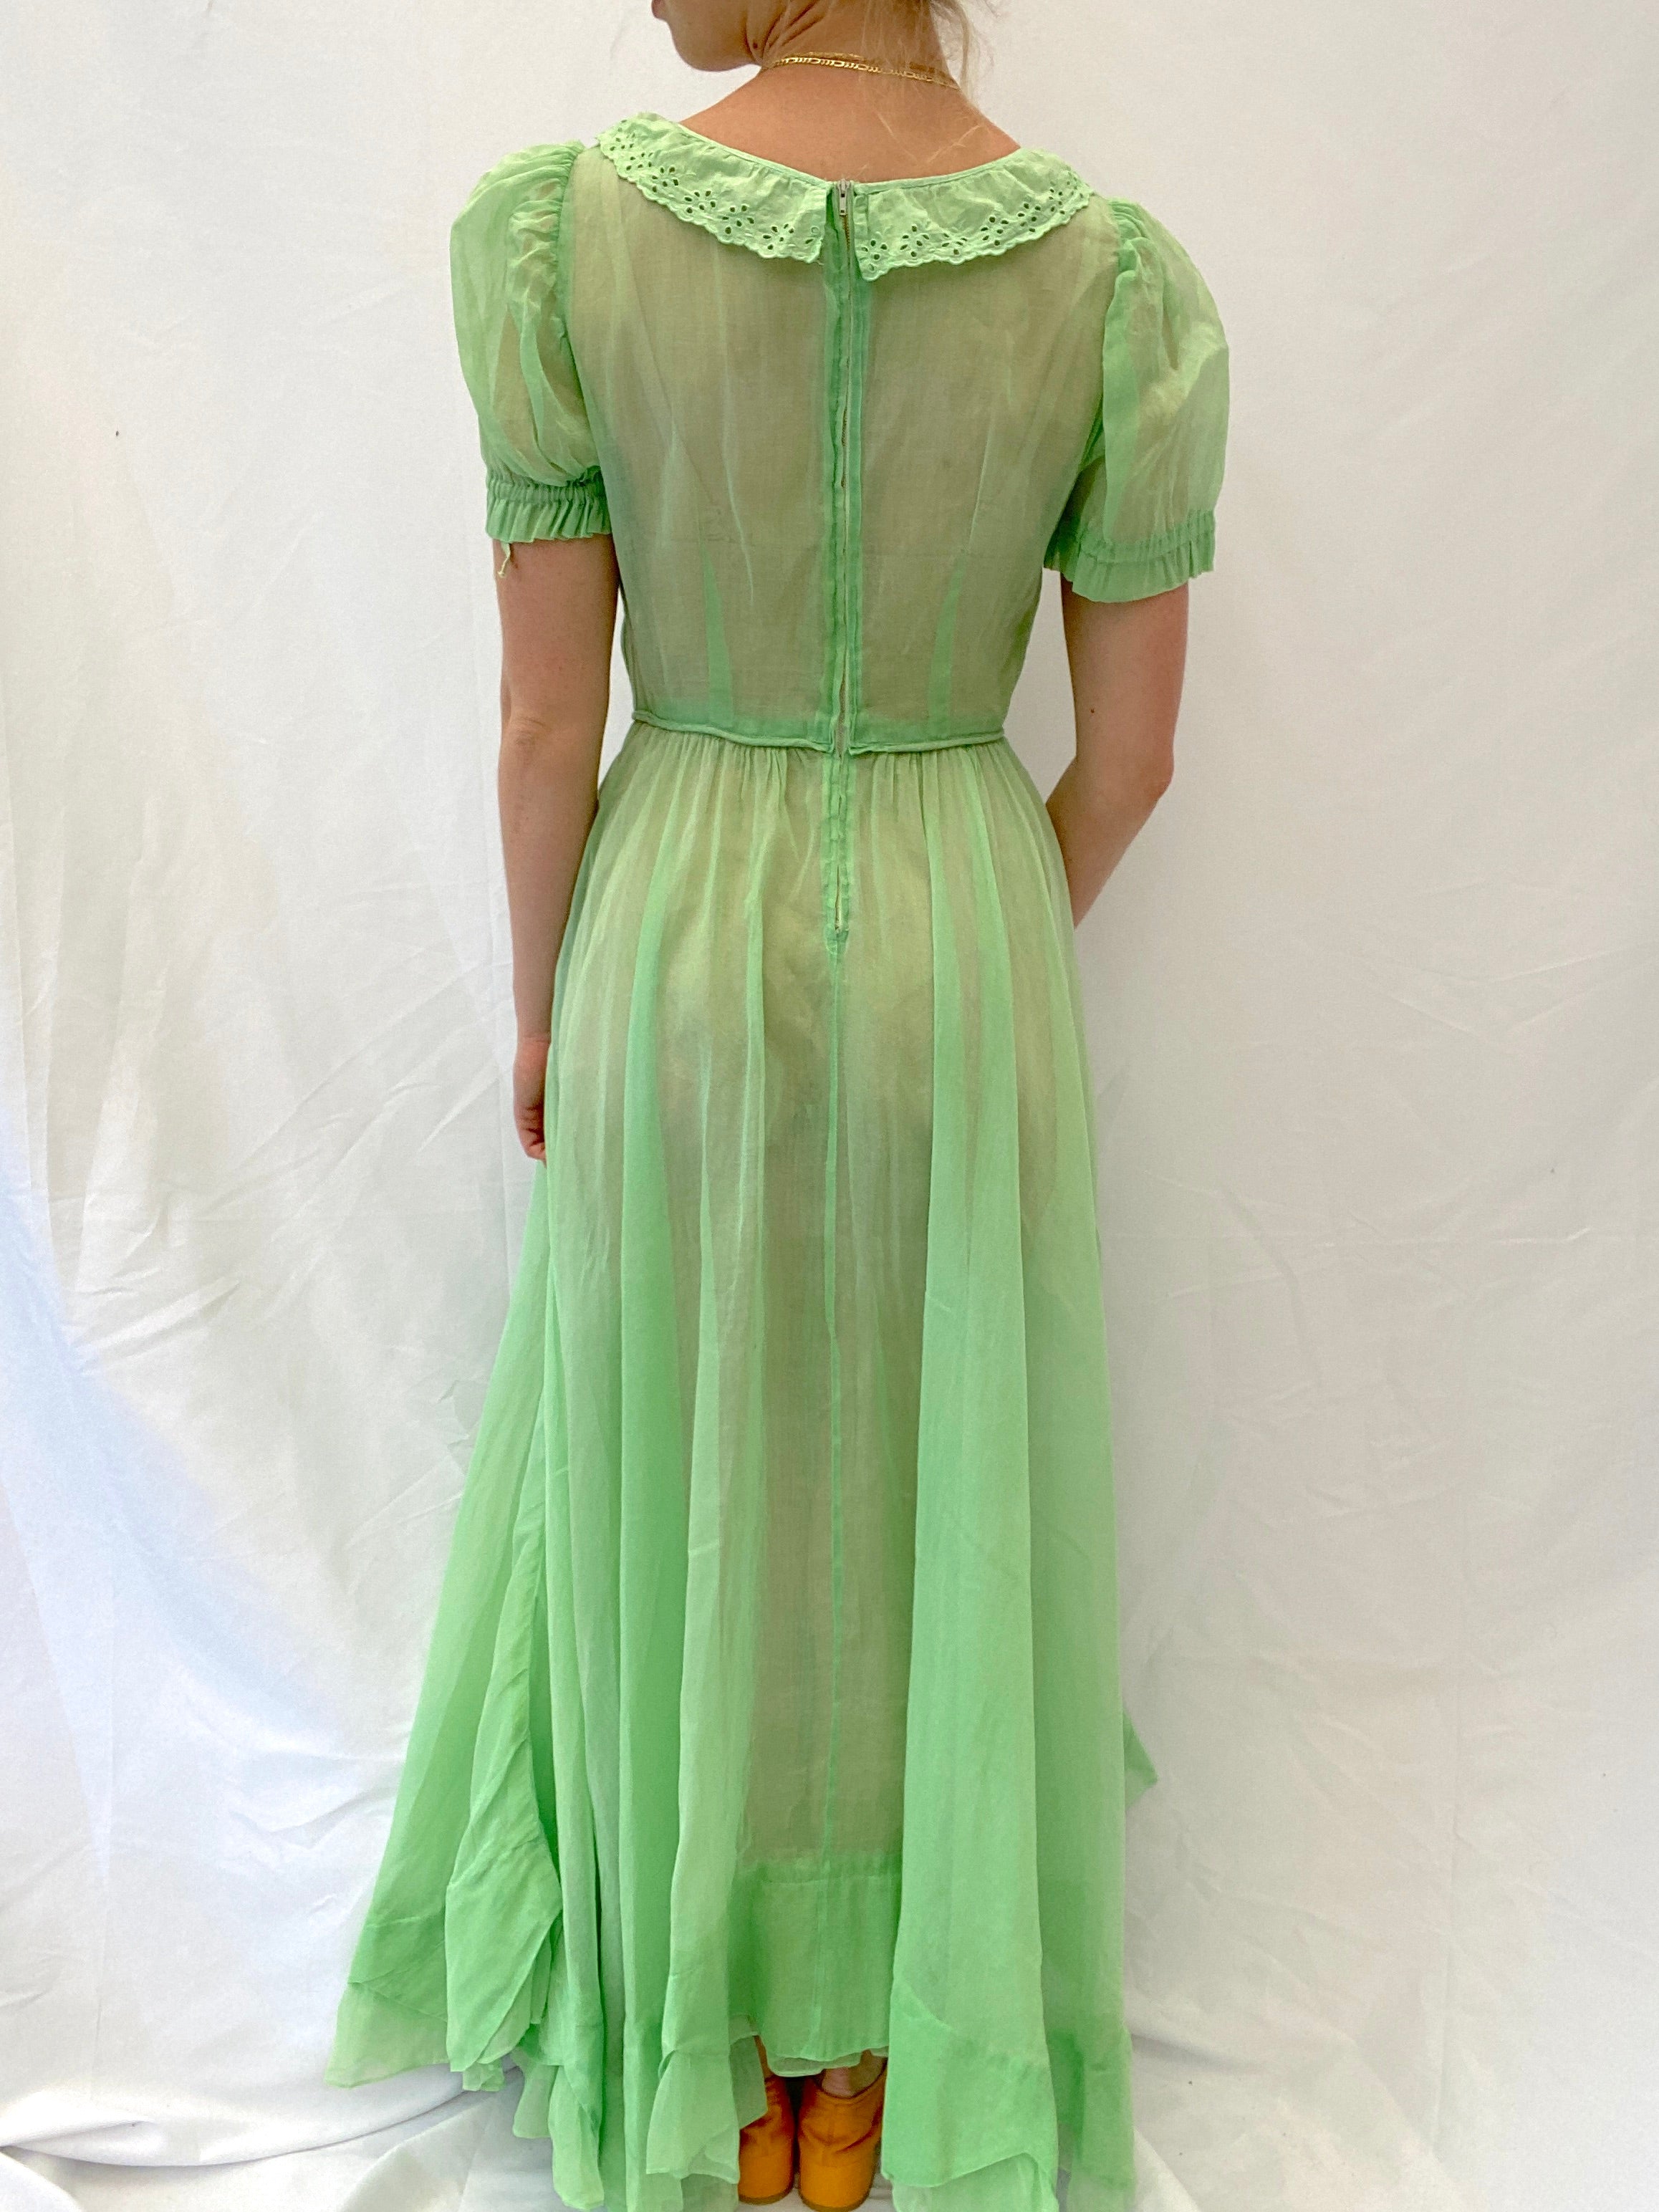 1930's Hand Dyed Green Puffed Sleeve Gown with Floral Eyelet Ruffle